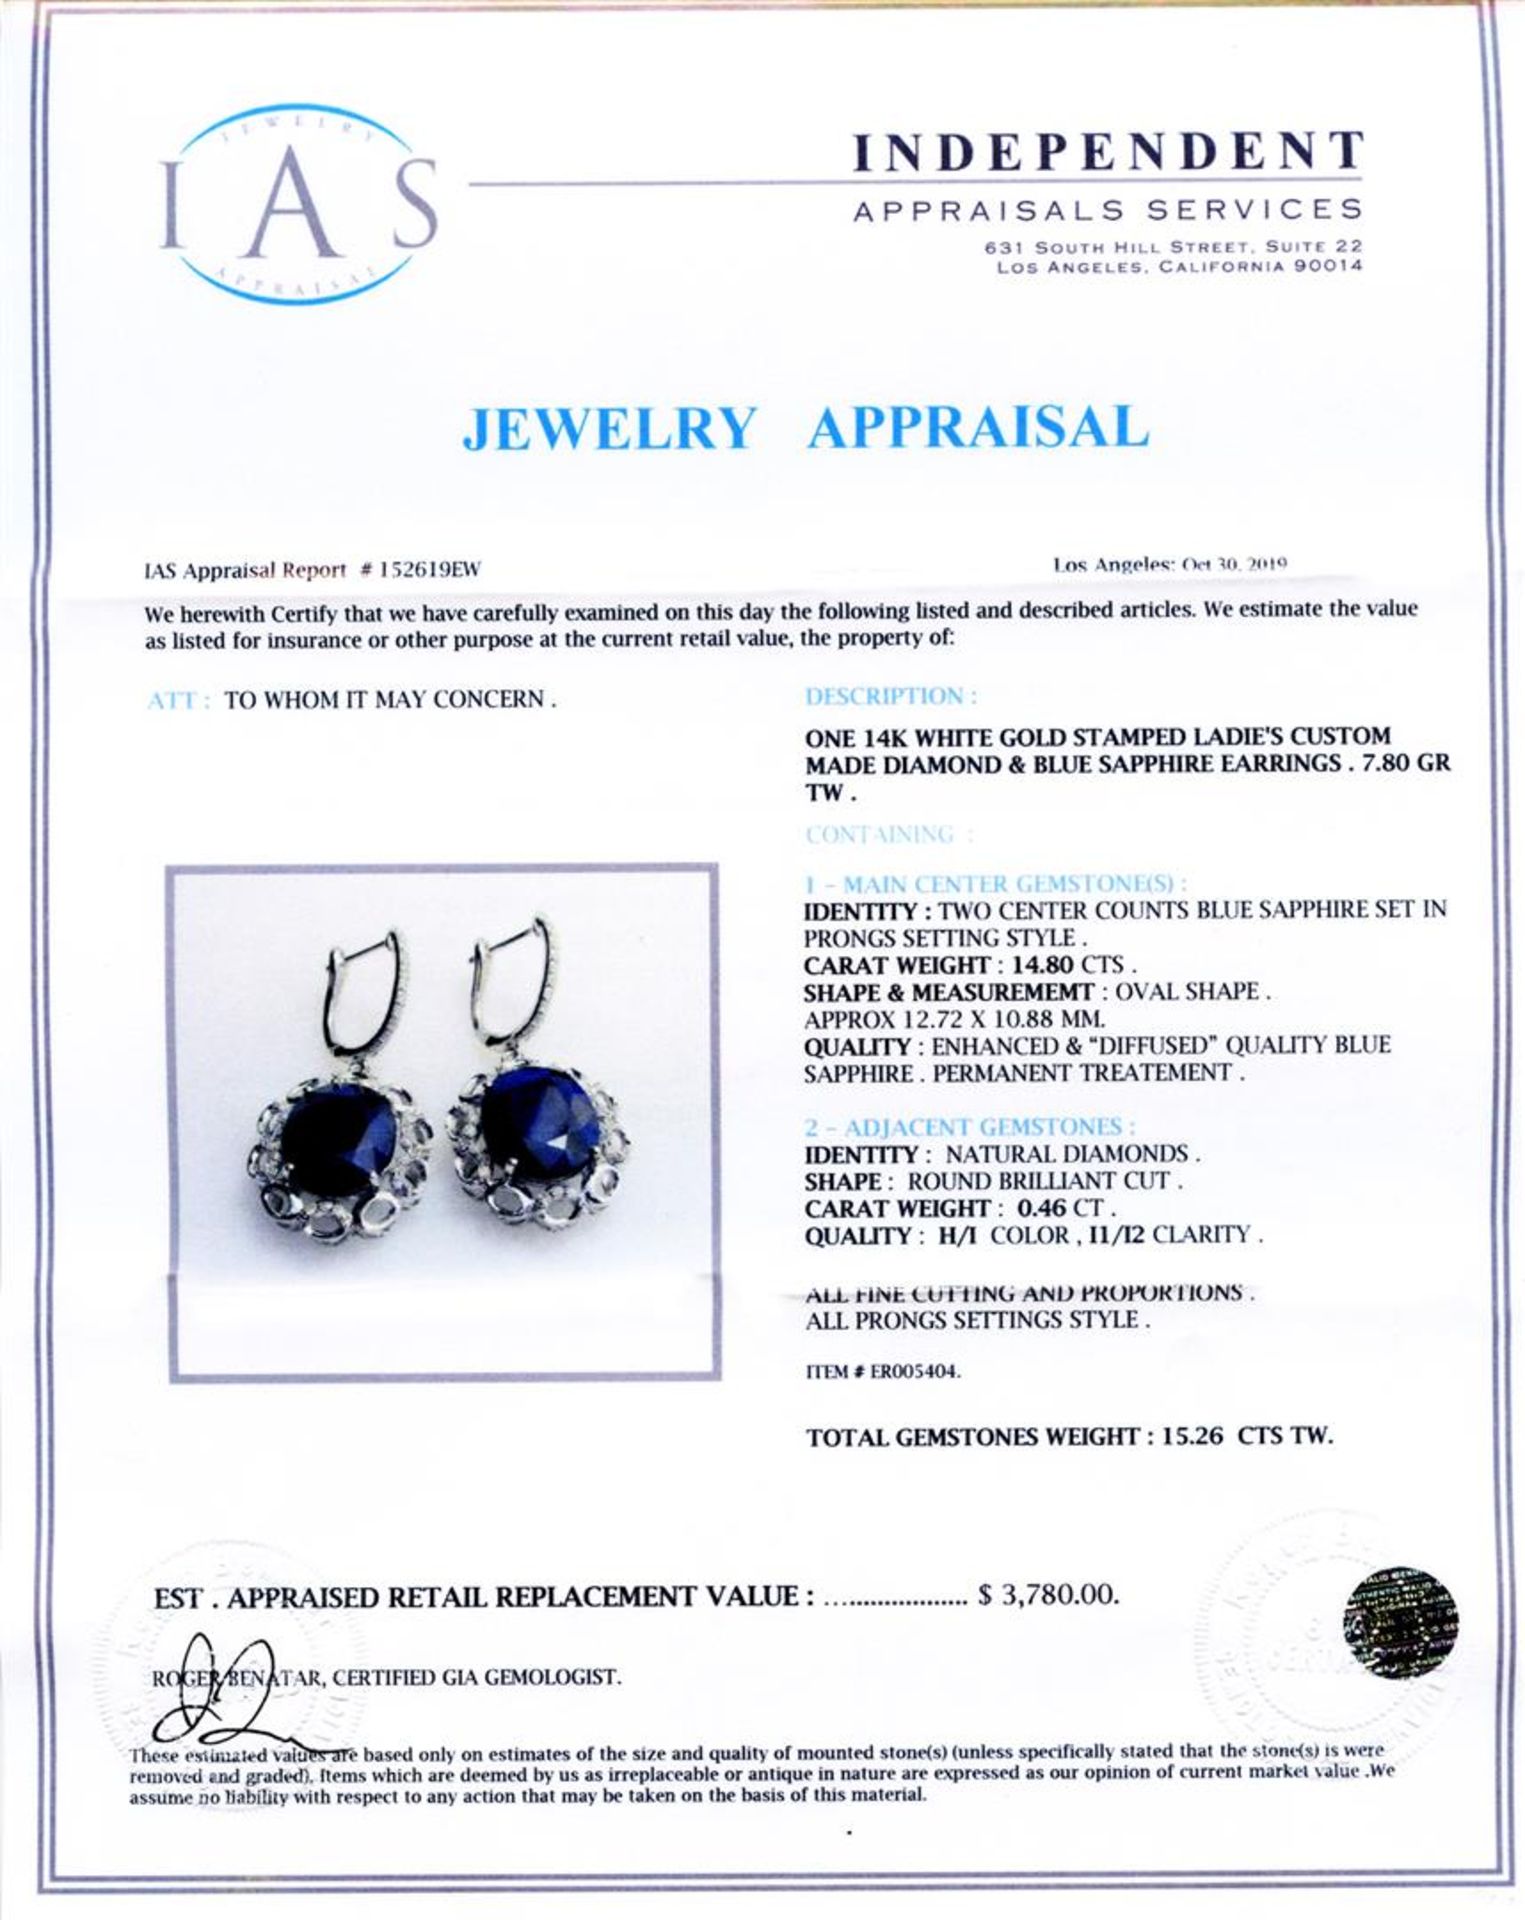 14.80 ctw Blue Sapphire and 0.46 ctw Diamond 14K White Gold Earrings - Image 4 of 4